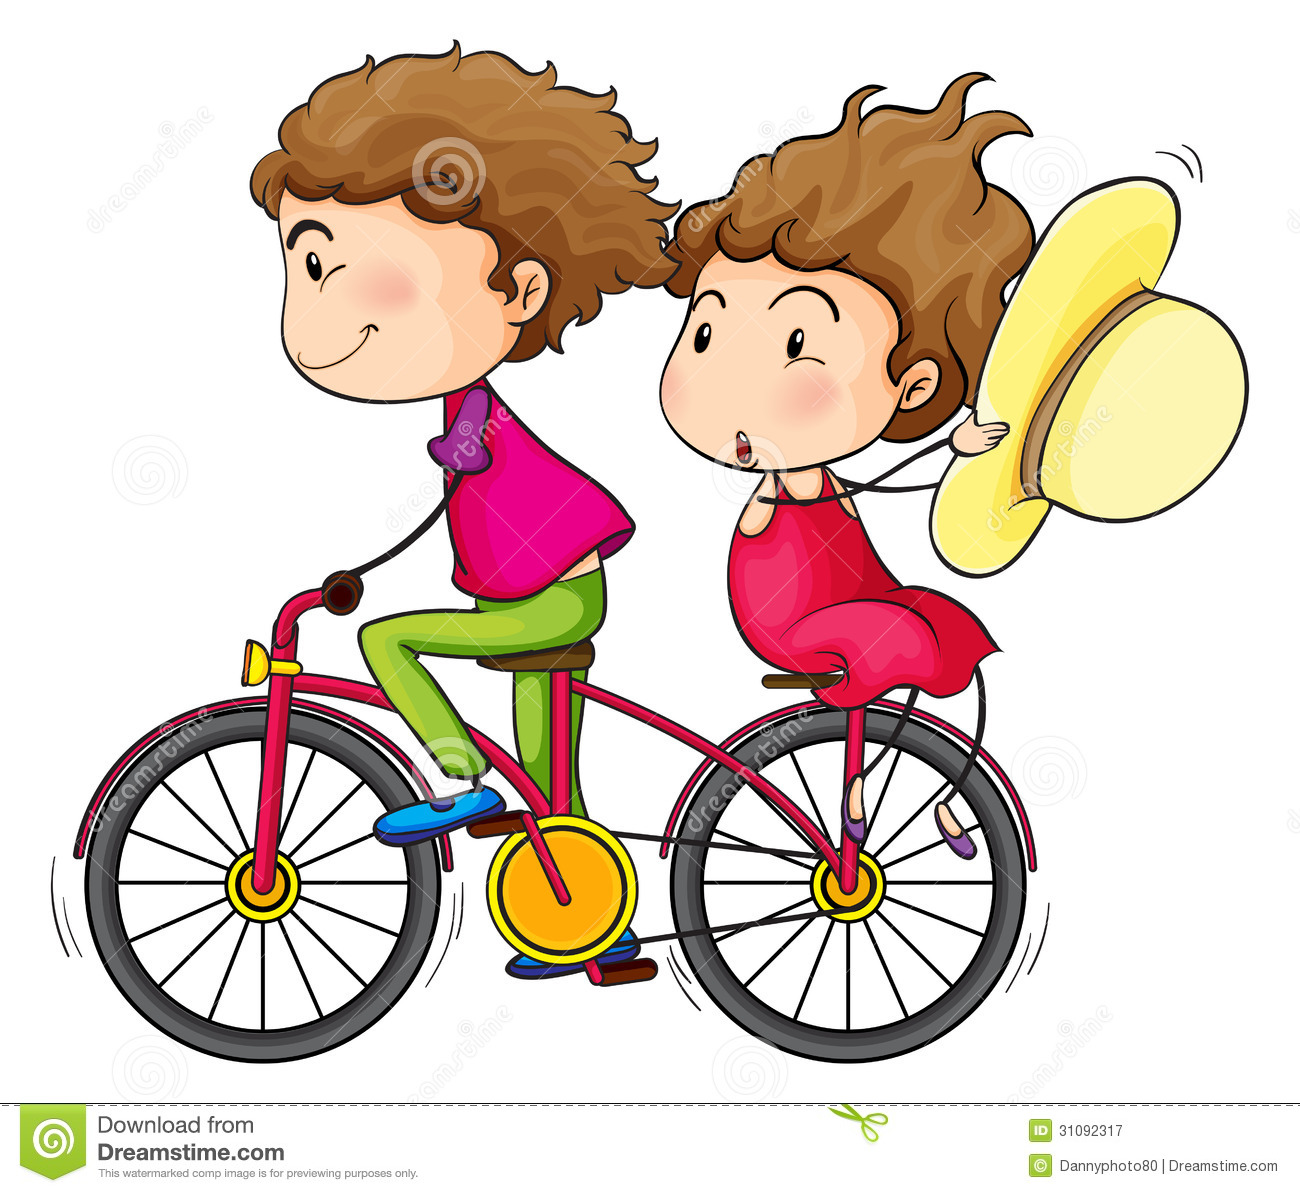 There Is 54 Bike Riding Rear View Frees All Used For Free Clipart